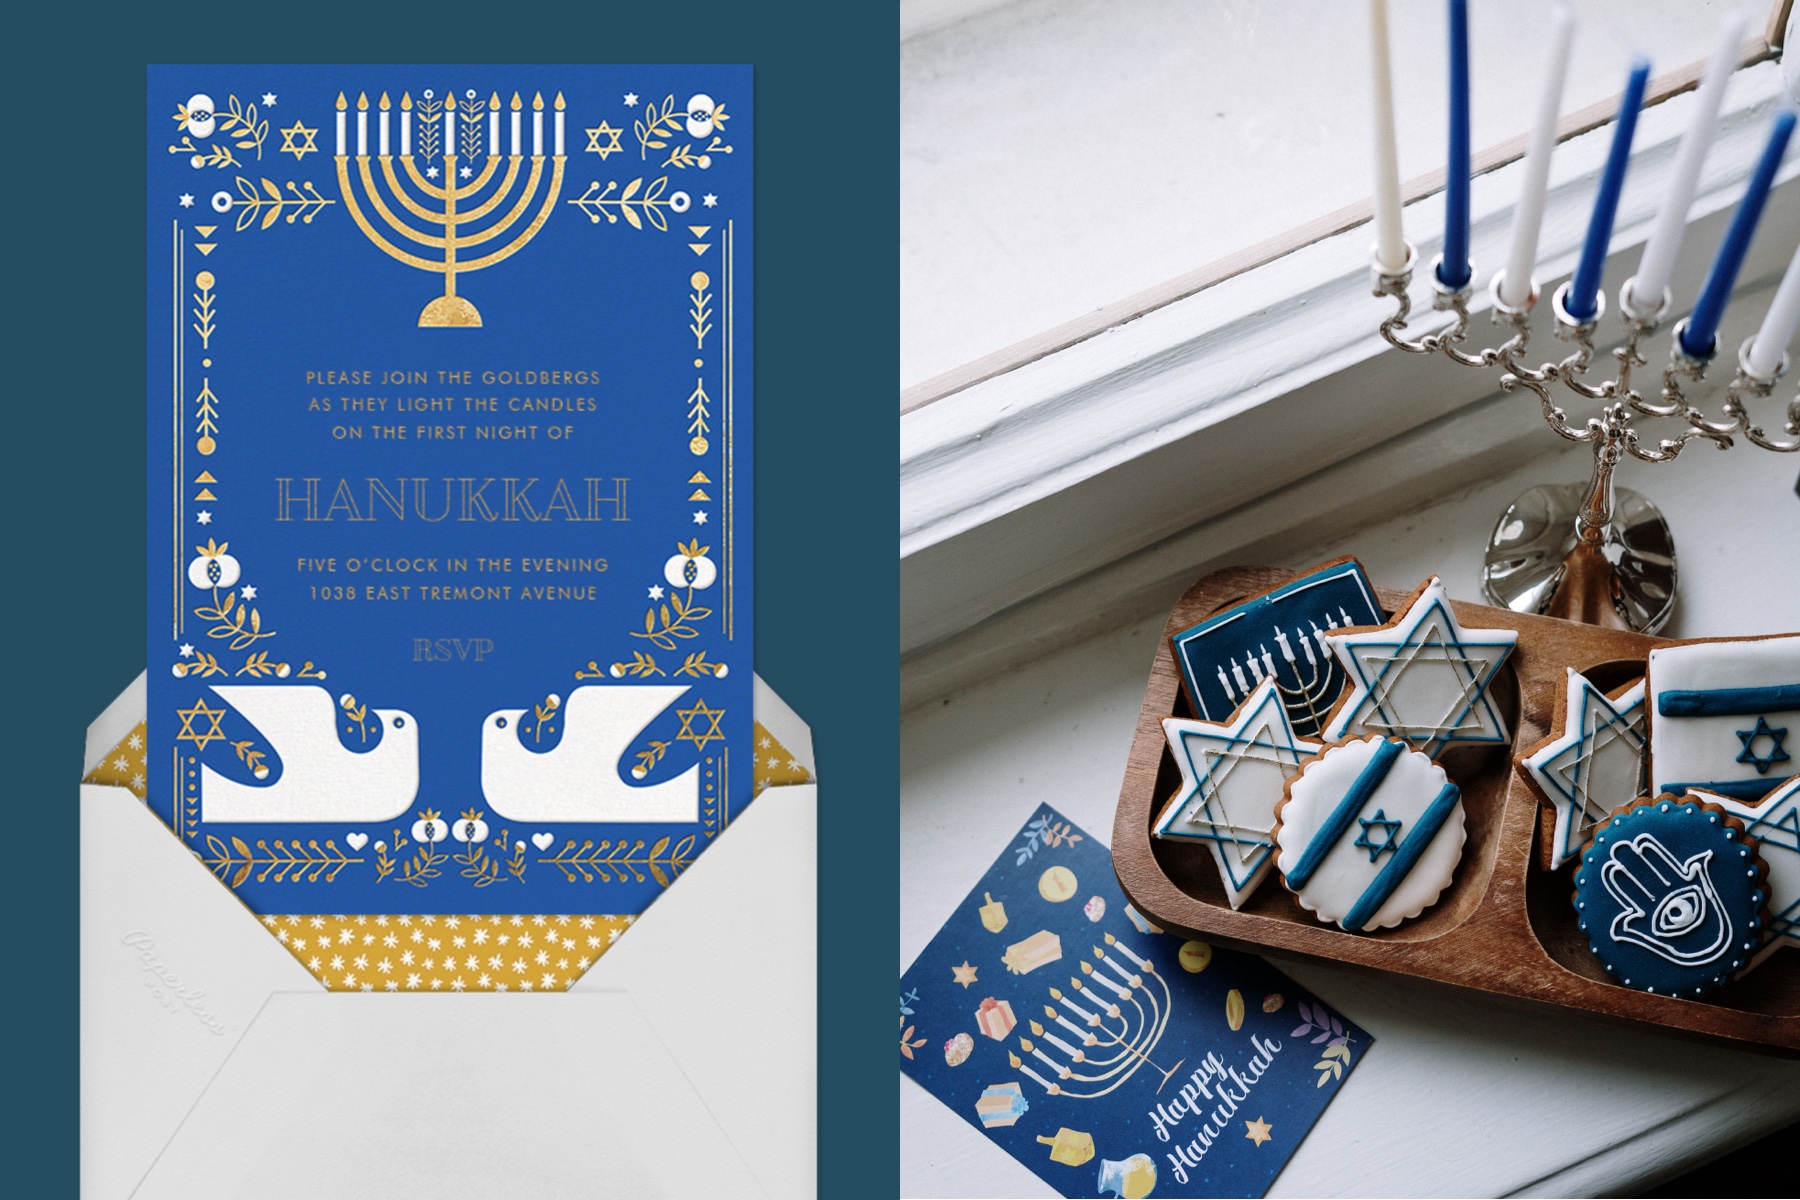 Left: A blue Hanukkah card and white envelope. Right: Blue and white Hanukkah cookies, a Hanukkah card, and a Chanukiah with candles. 